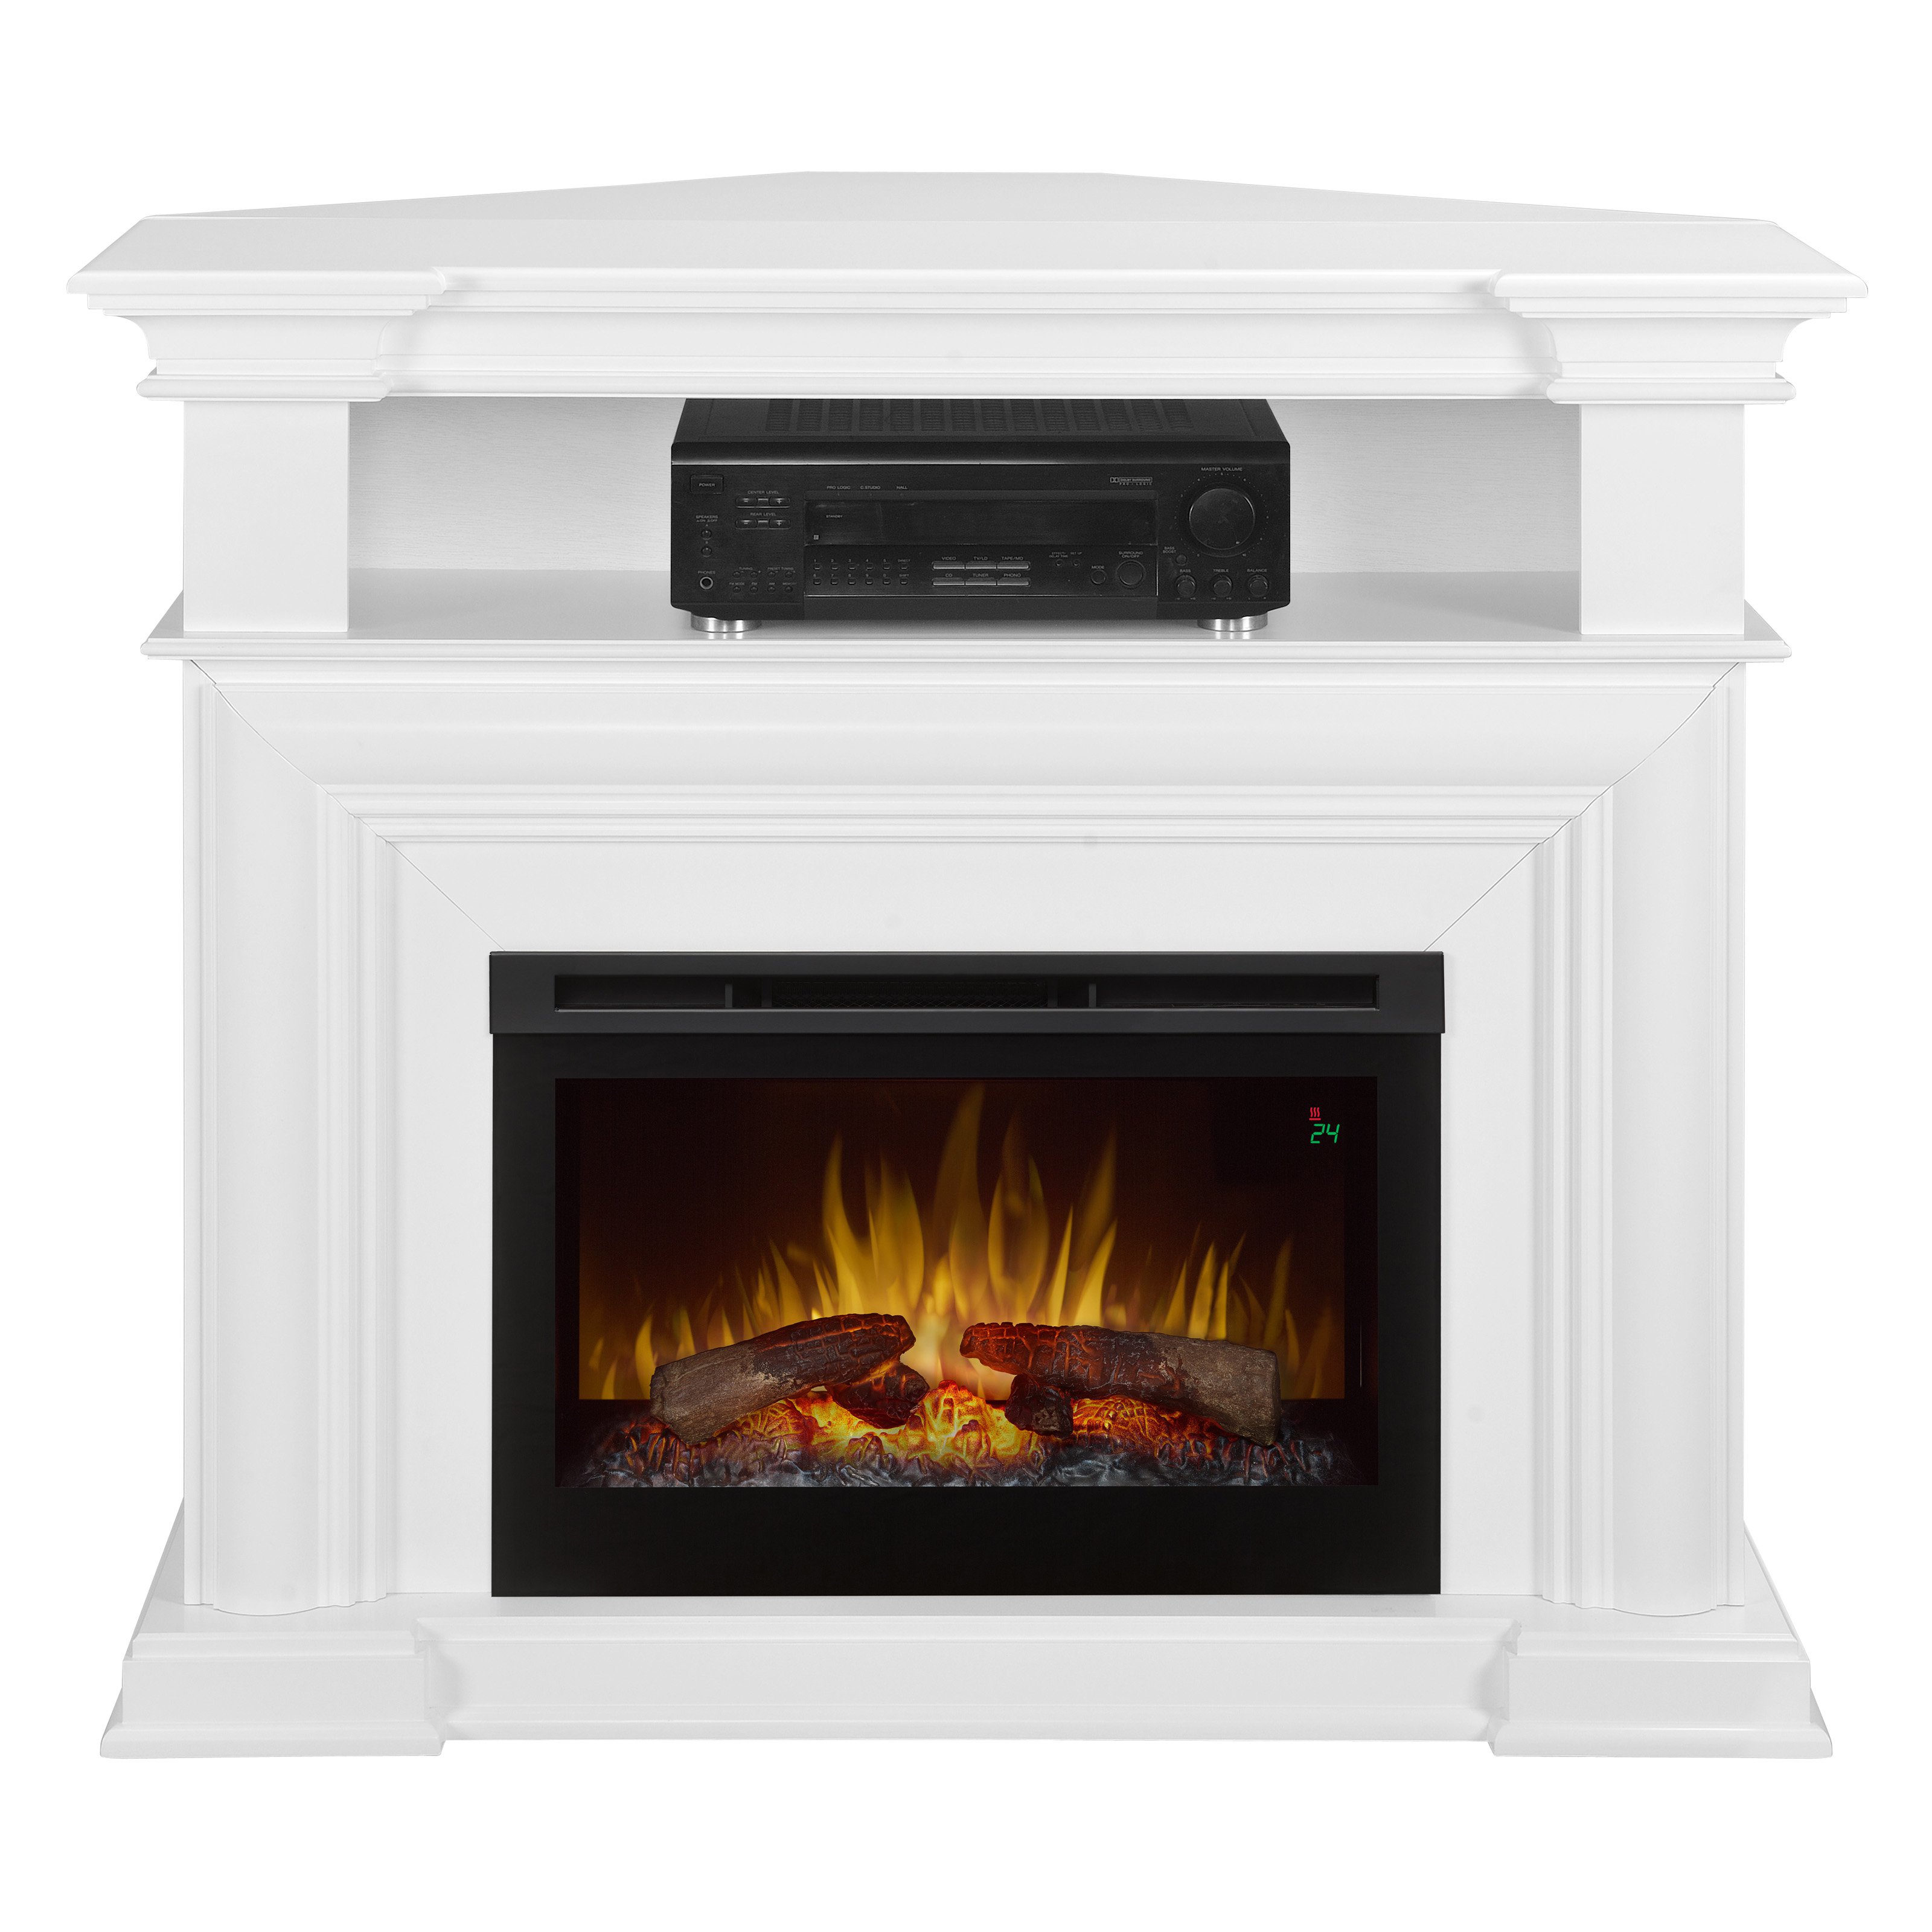 Walmart Electric Fireplace Tv Stand Lovely Electric Fireplace with Convertible Corner Option and Drop Down Front